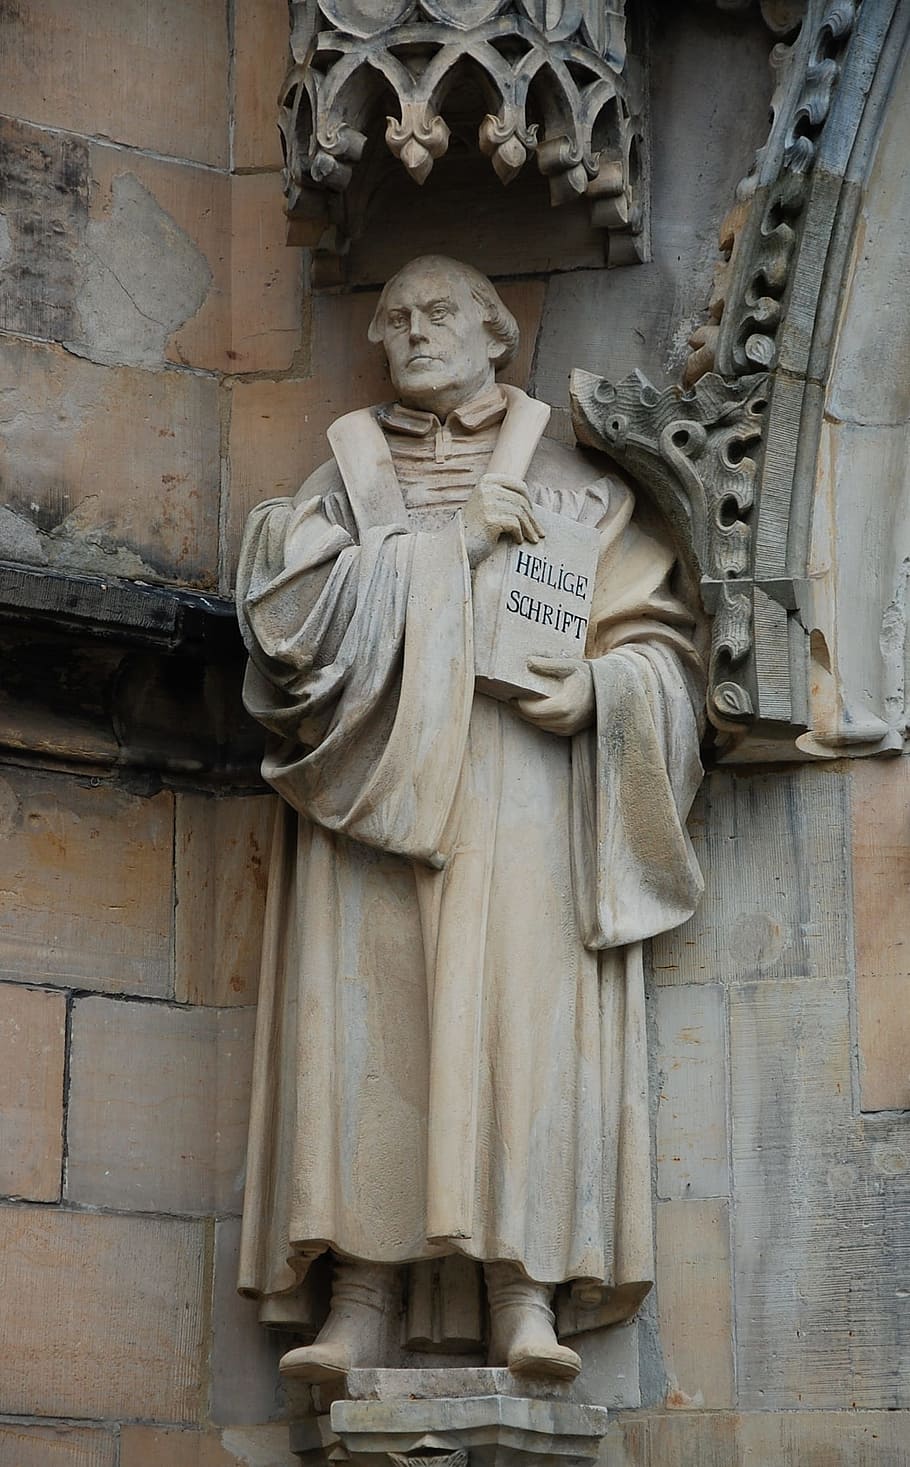 Martin Luther, Protestant, Reformation, protestant, reformation, figure, monument, luther, gotha, statue, sculpture